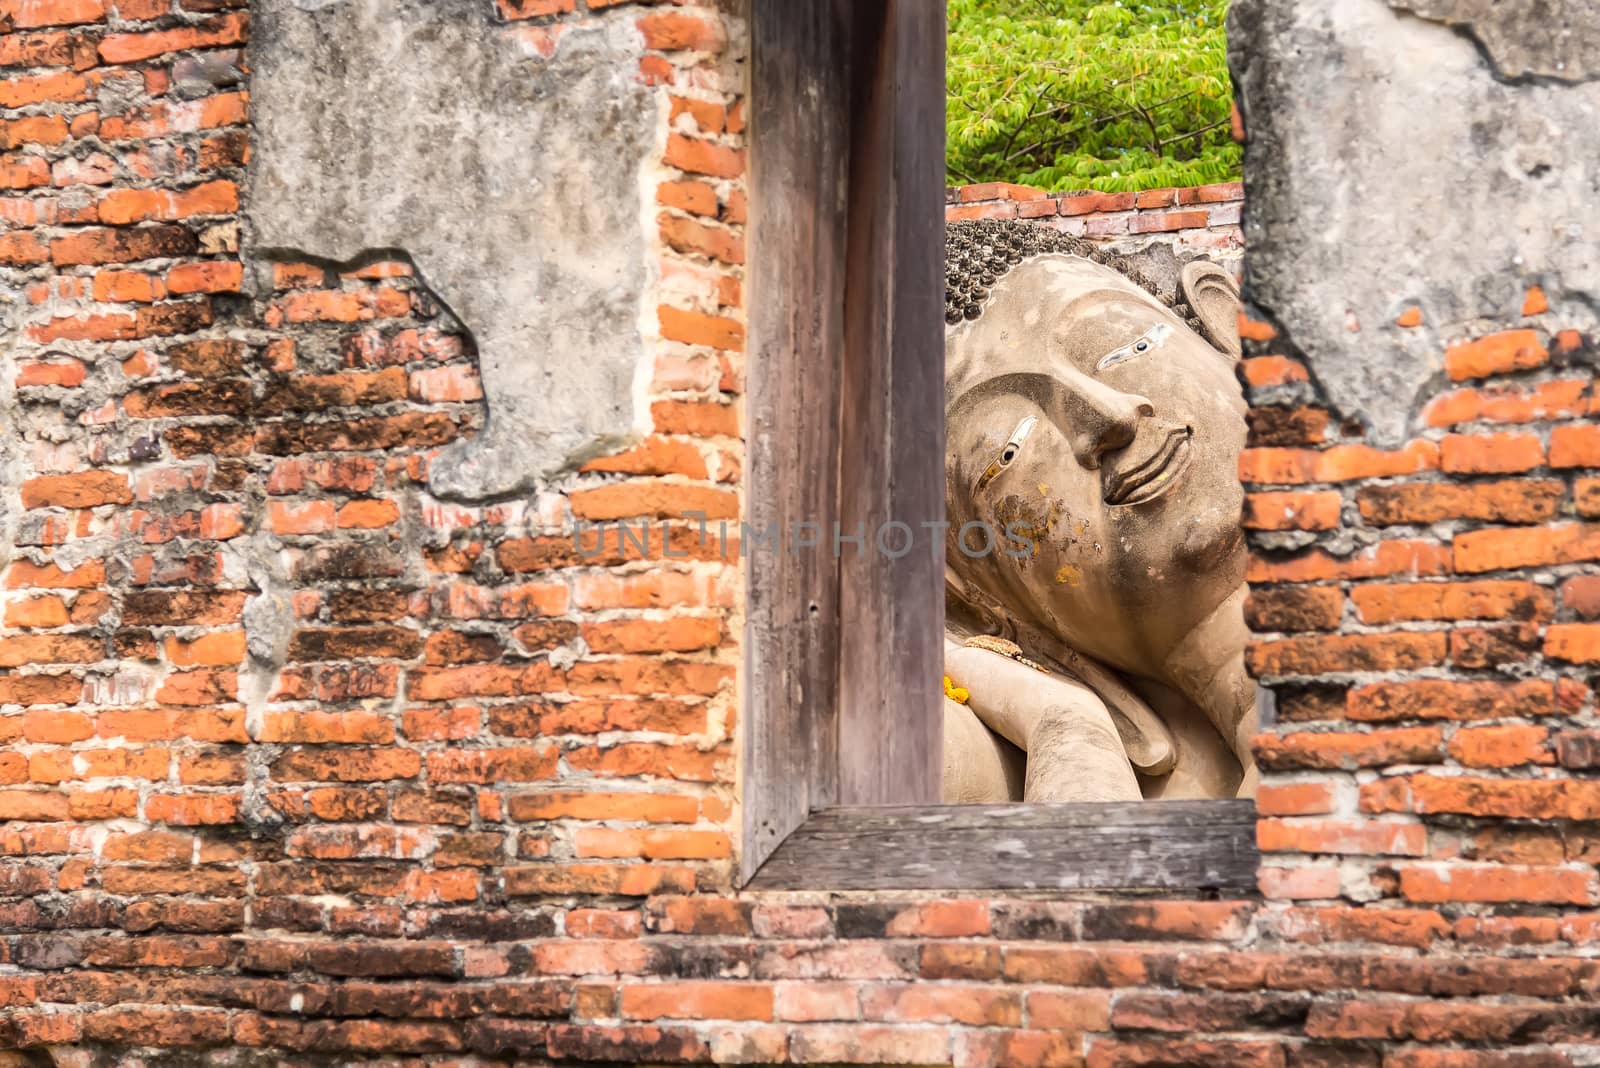 Ayutthaya Thailand June 13, 2020 : Reclining Buddha in the templ by Bubbers